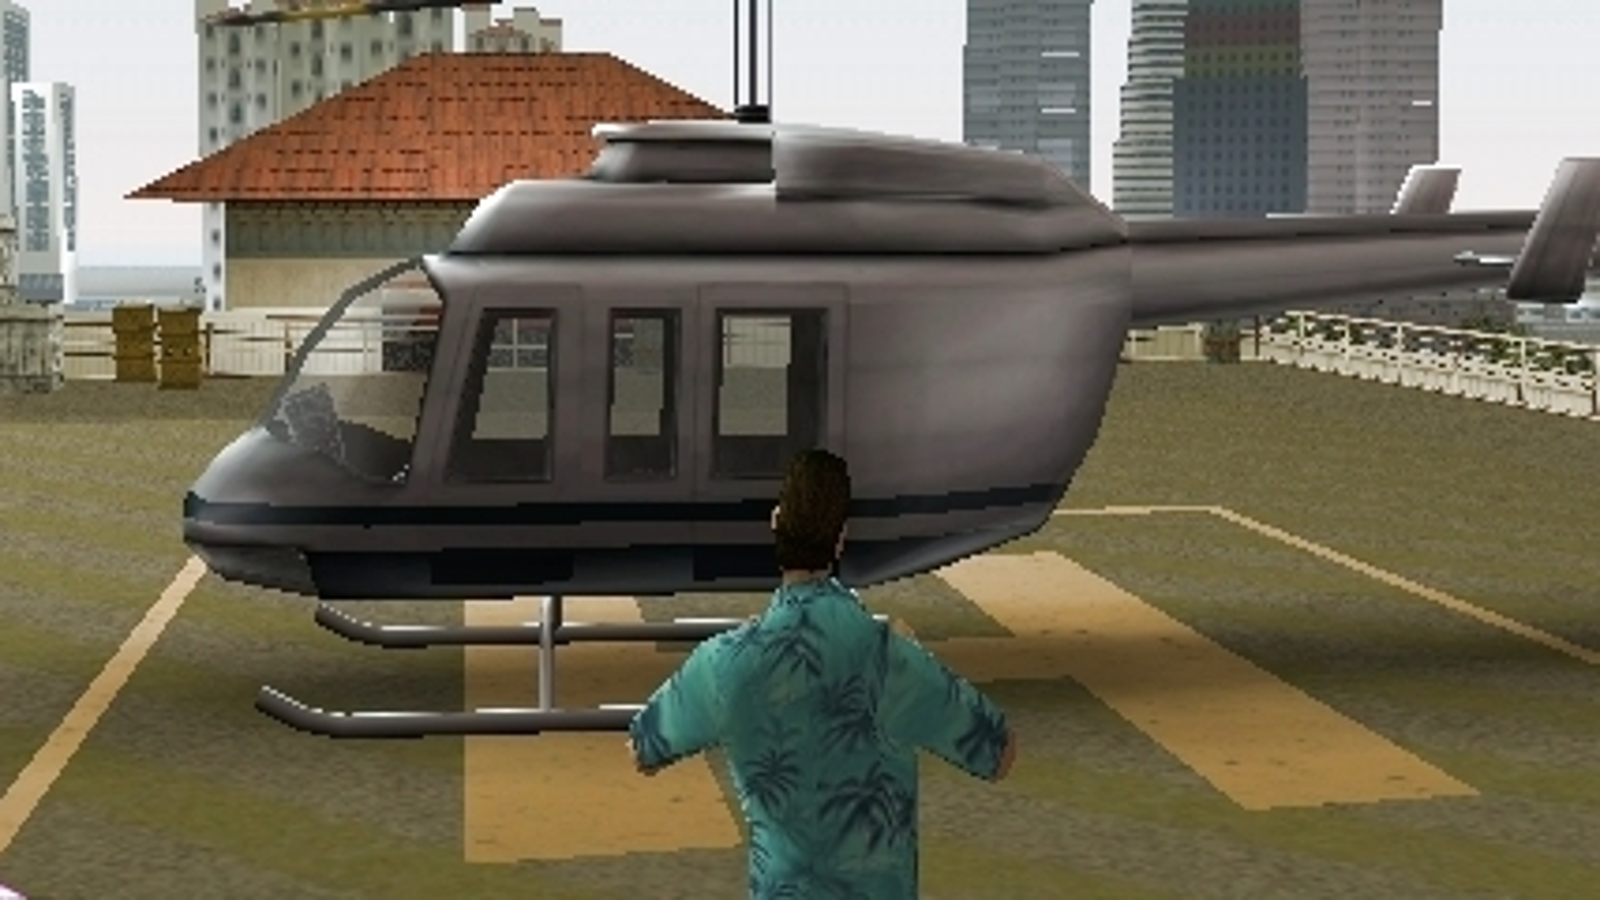 GTA Vice City helicopter locations and helicopter controls explained